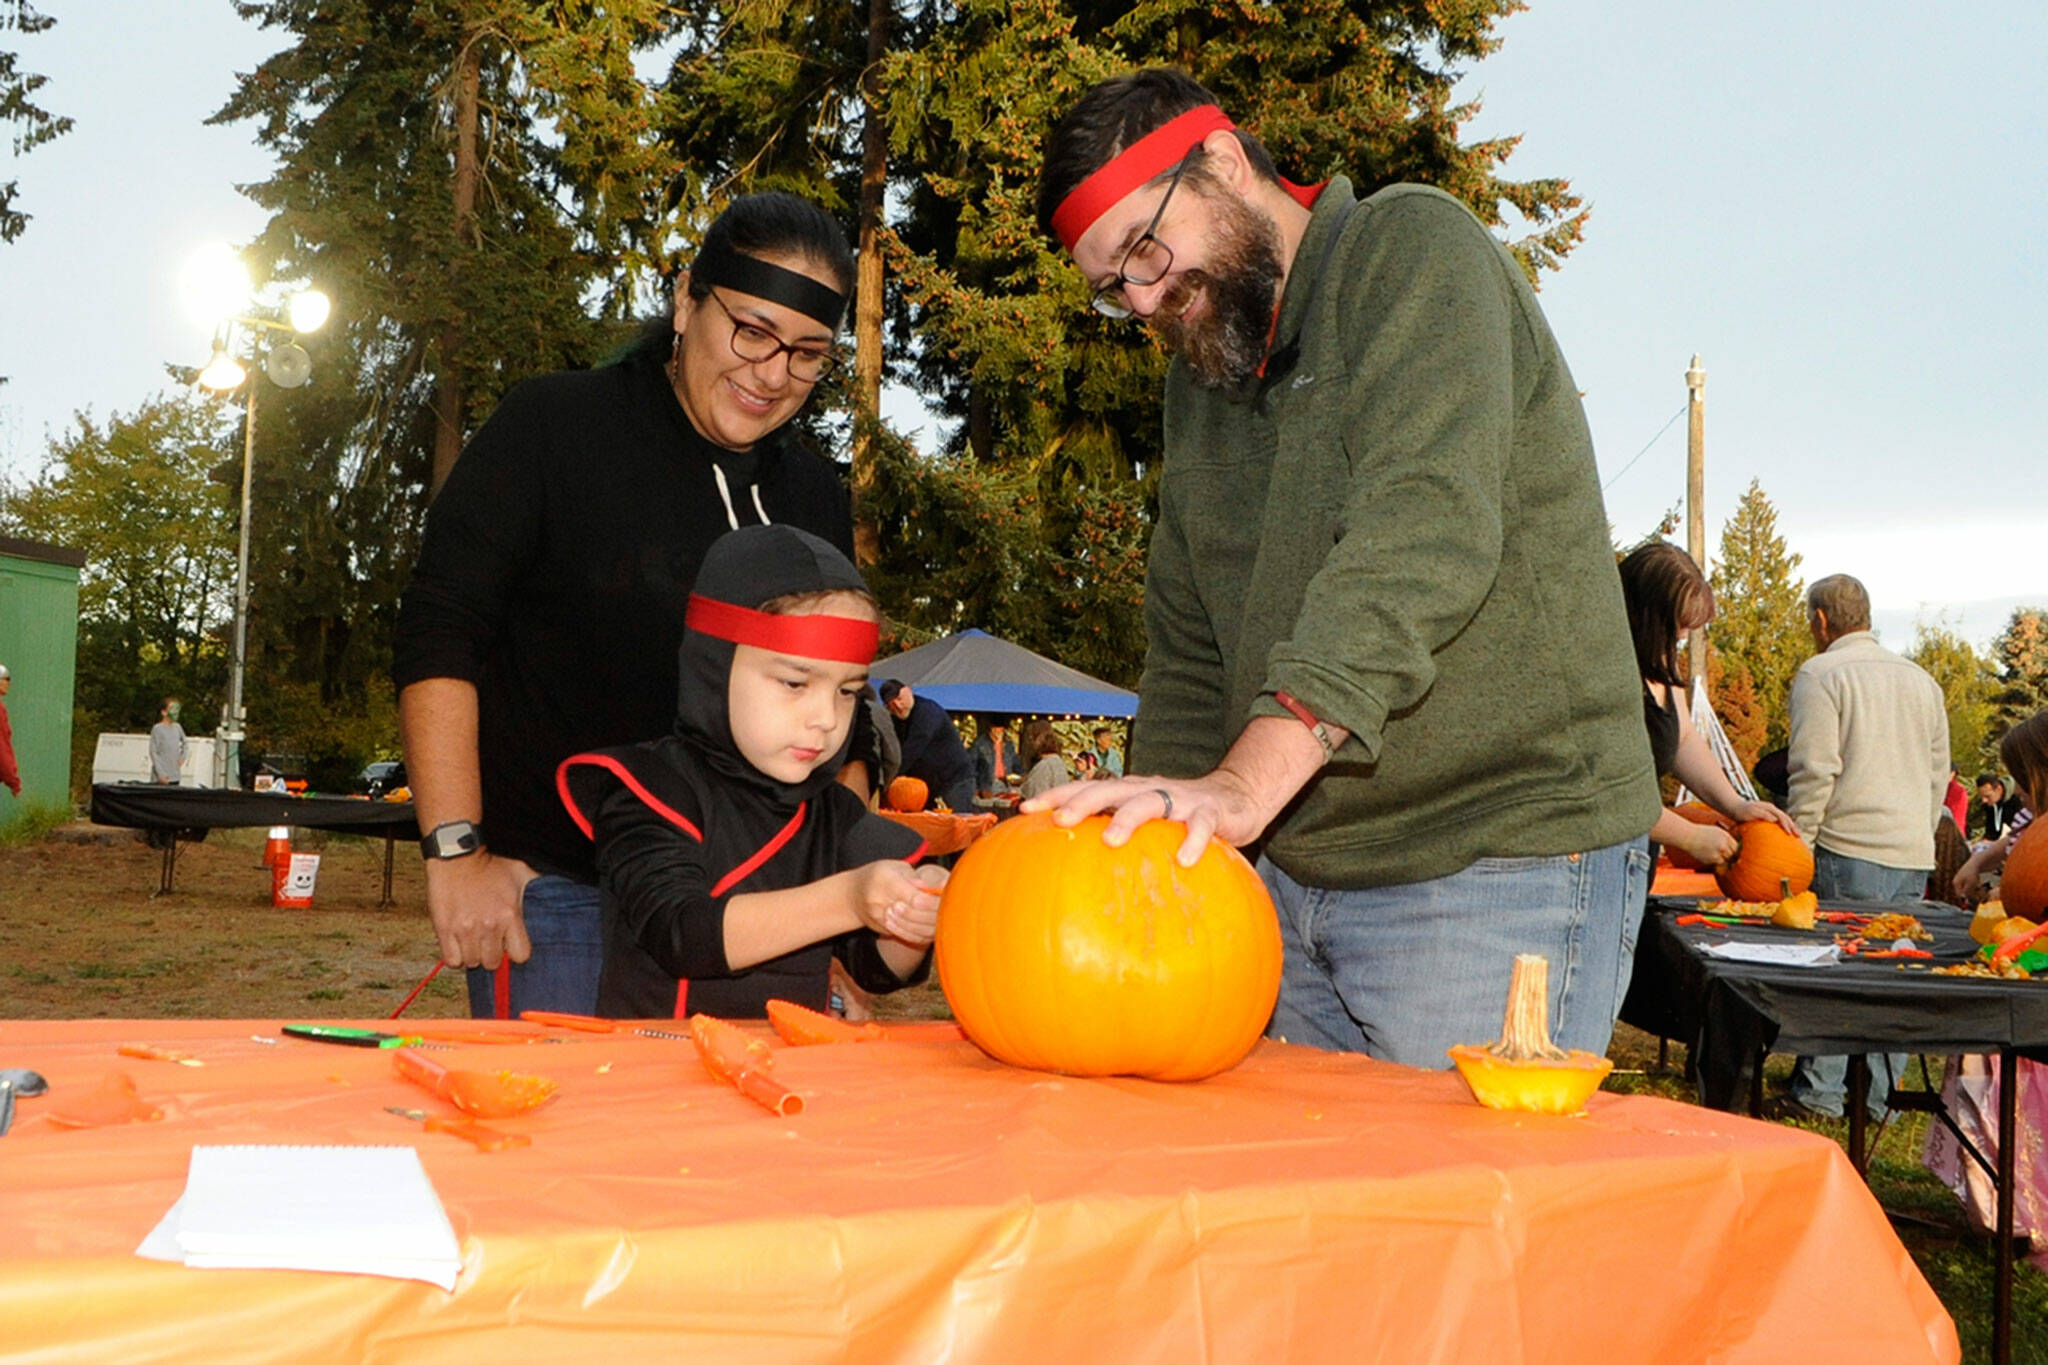 Sequim Gazette photo by Matthew Nash/ Six-year-old ninja Aiden Havel-Beristain carves a pumpkin with his ninja parents Gabriela Beristain-Havel and Tim Havel at the Sequim Prairie Grange’s Trunk-or-Treat on Oct. 29. For Halloween, Aiden said he loves Kit-Kats.